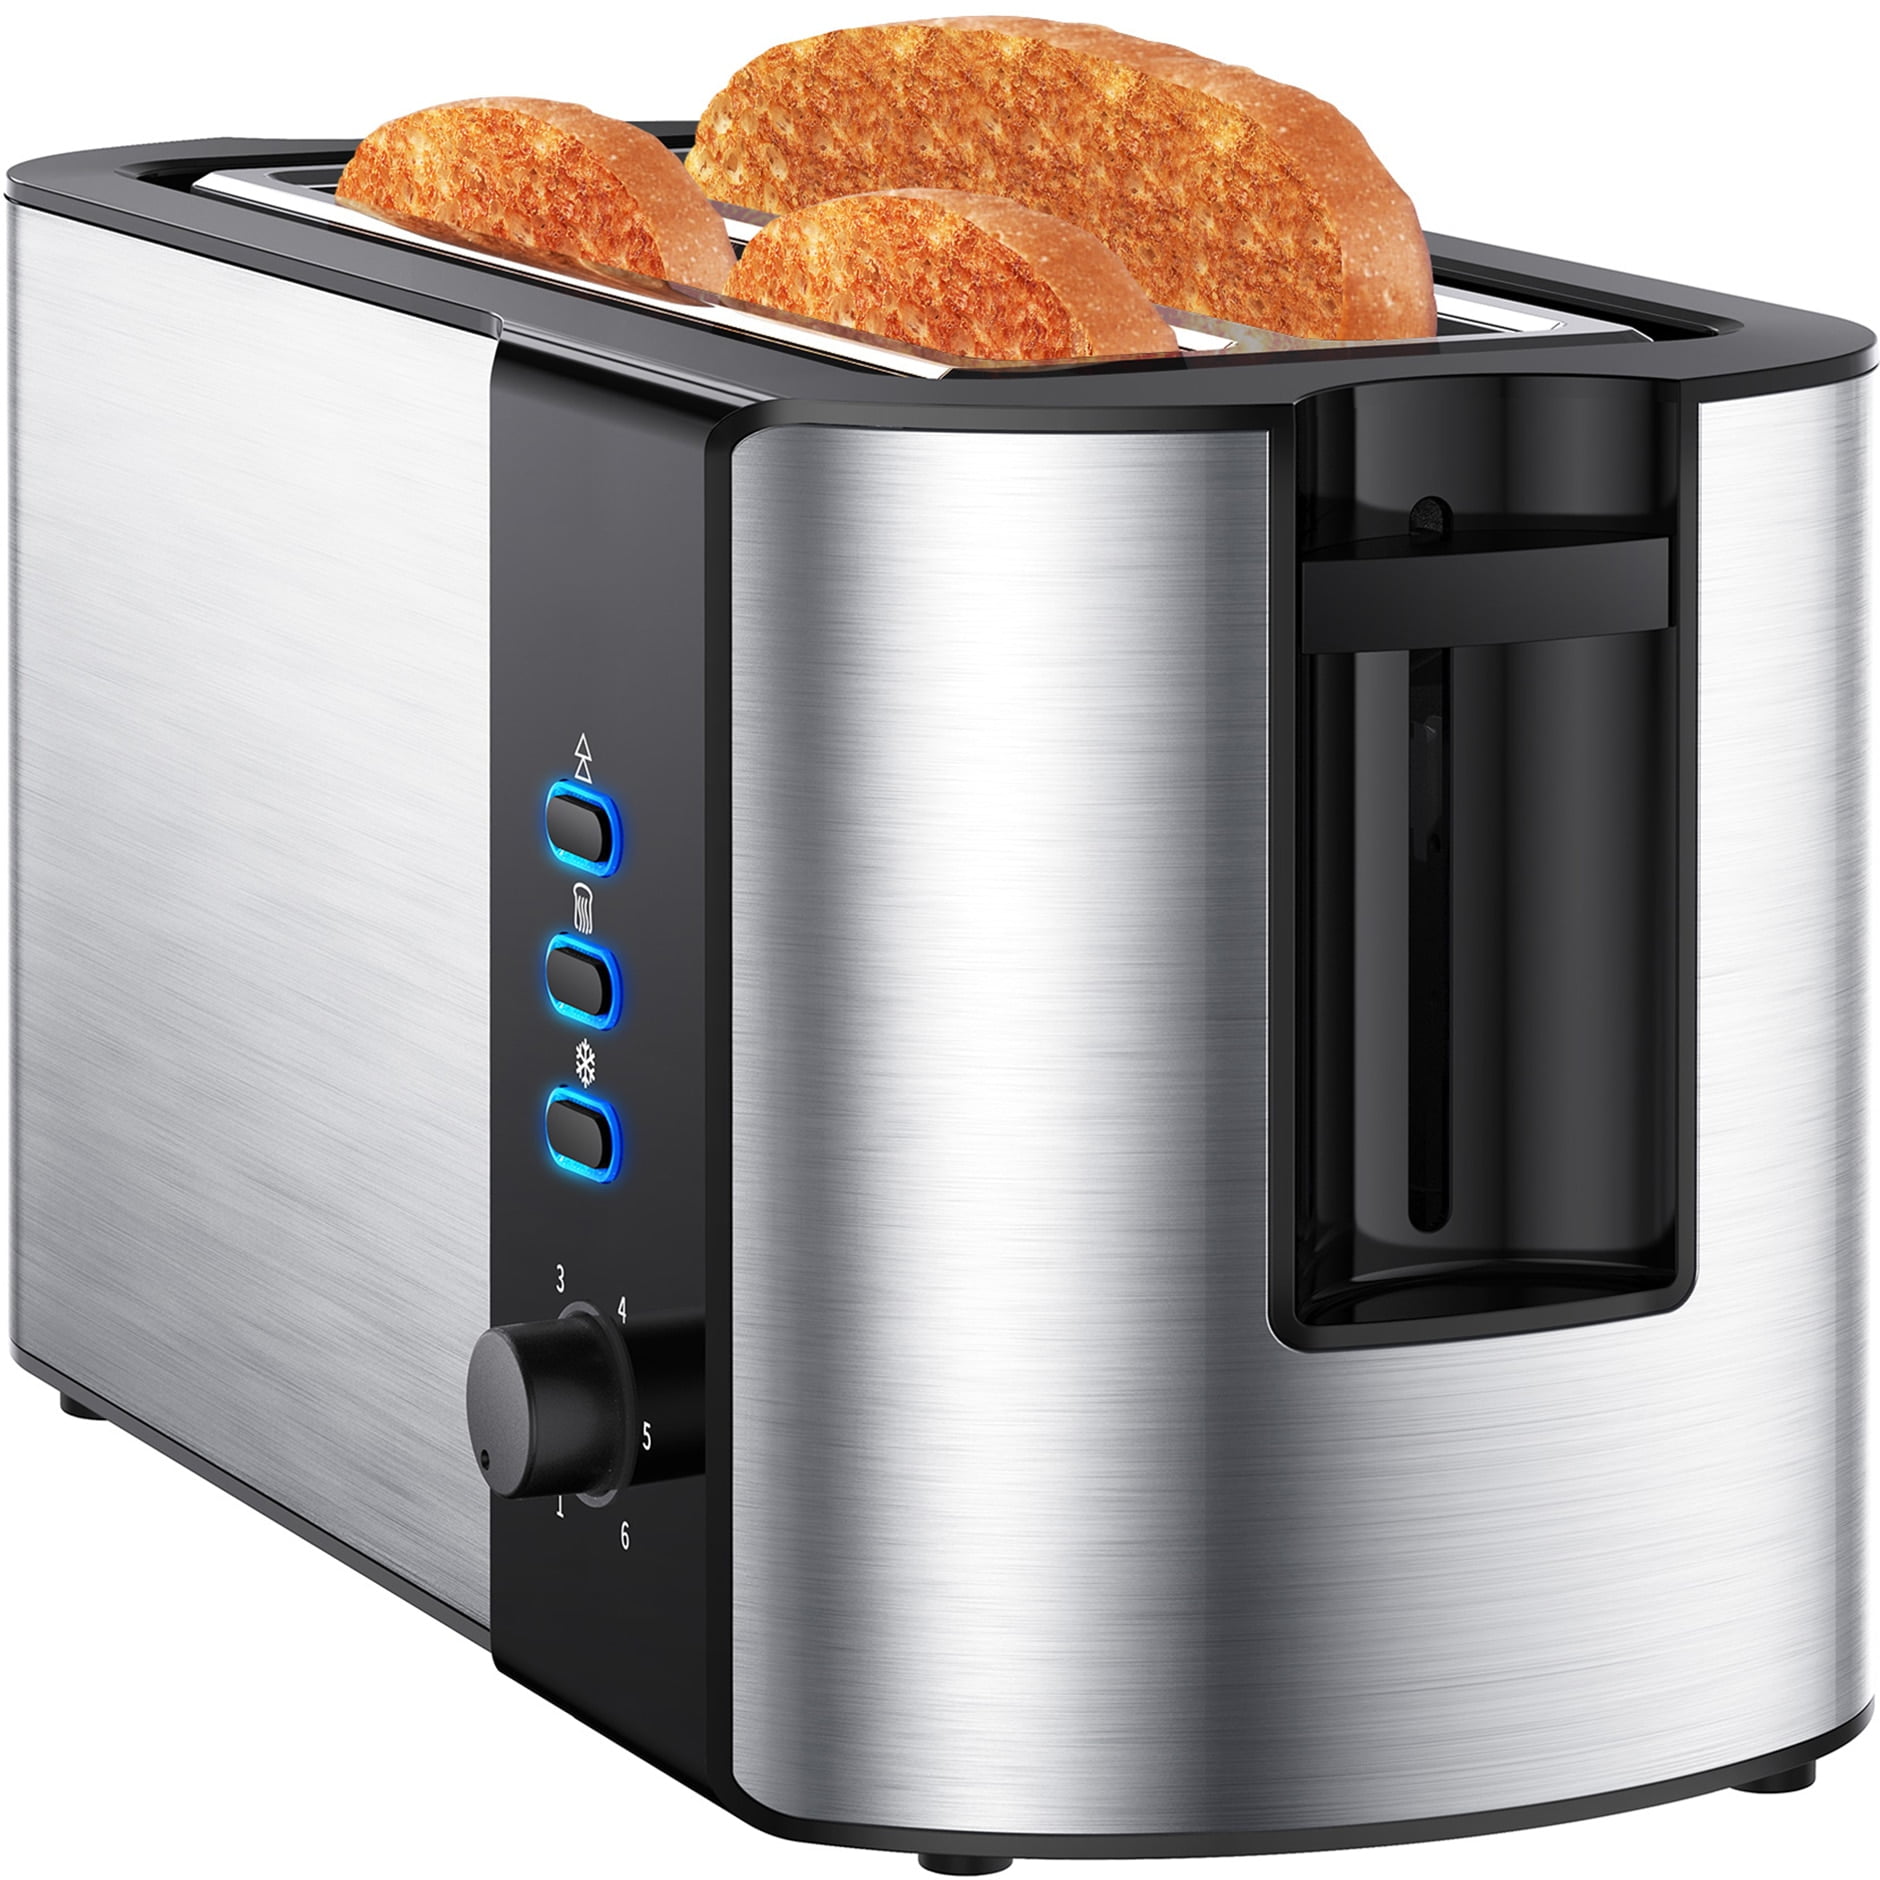 IKICH Toaster 4 Slice, Long Slot Toaster with Warming Rack, 6 Browning  Control, Reheat, Defrost, Compact Countertop Stainless Steel Toaster 4 Slice  for Artisan Bread, Muffins, Croissants, Bun 